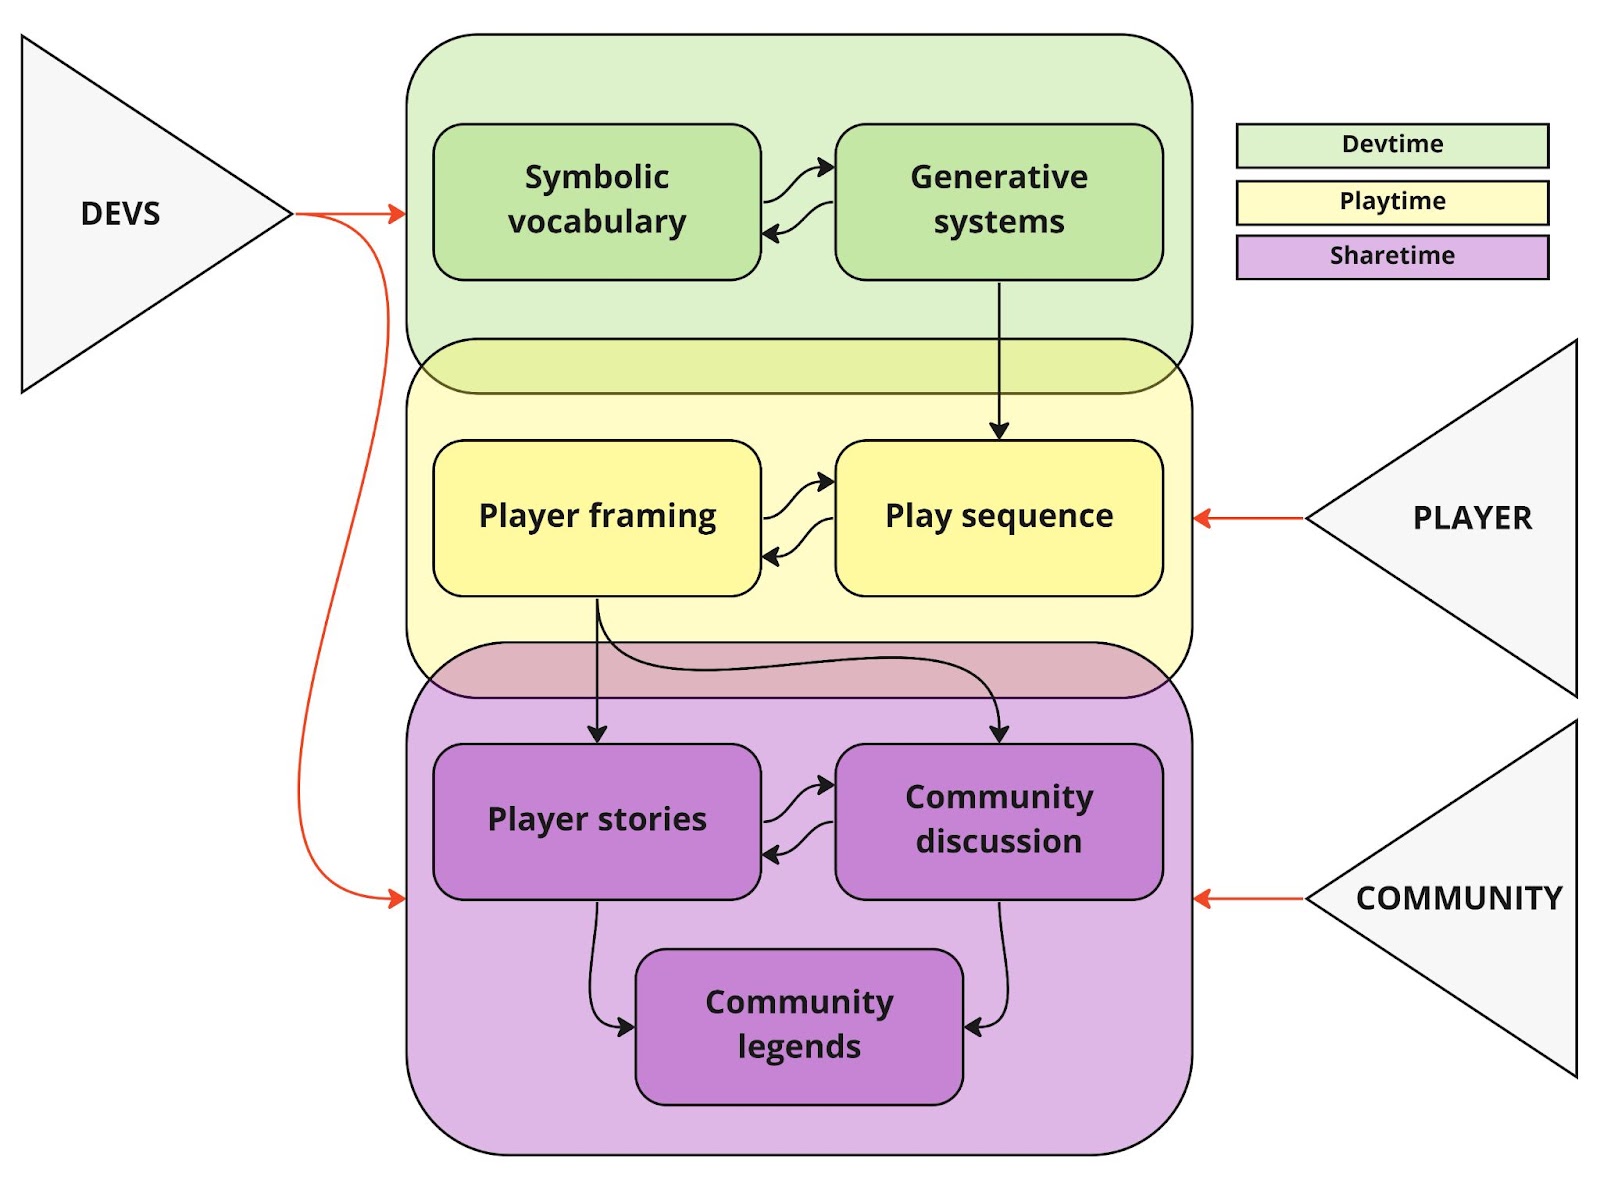 This is a diagram documenting the different phases of a game's lifecycle (devtime, playtime, and sharetime) and the flow between them. Its focus is on the formation of player stories.